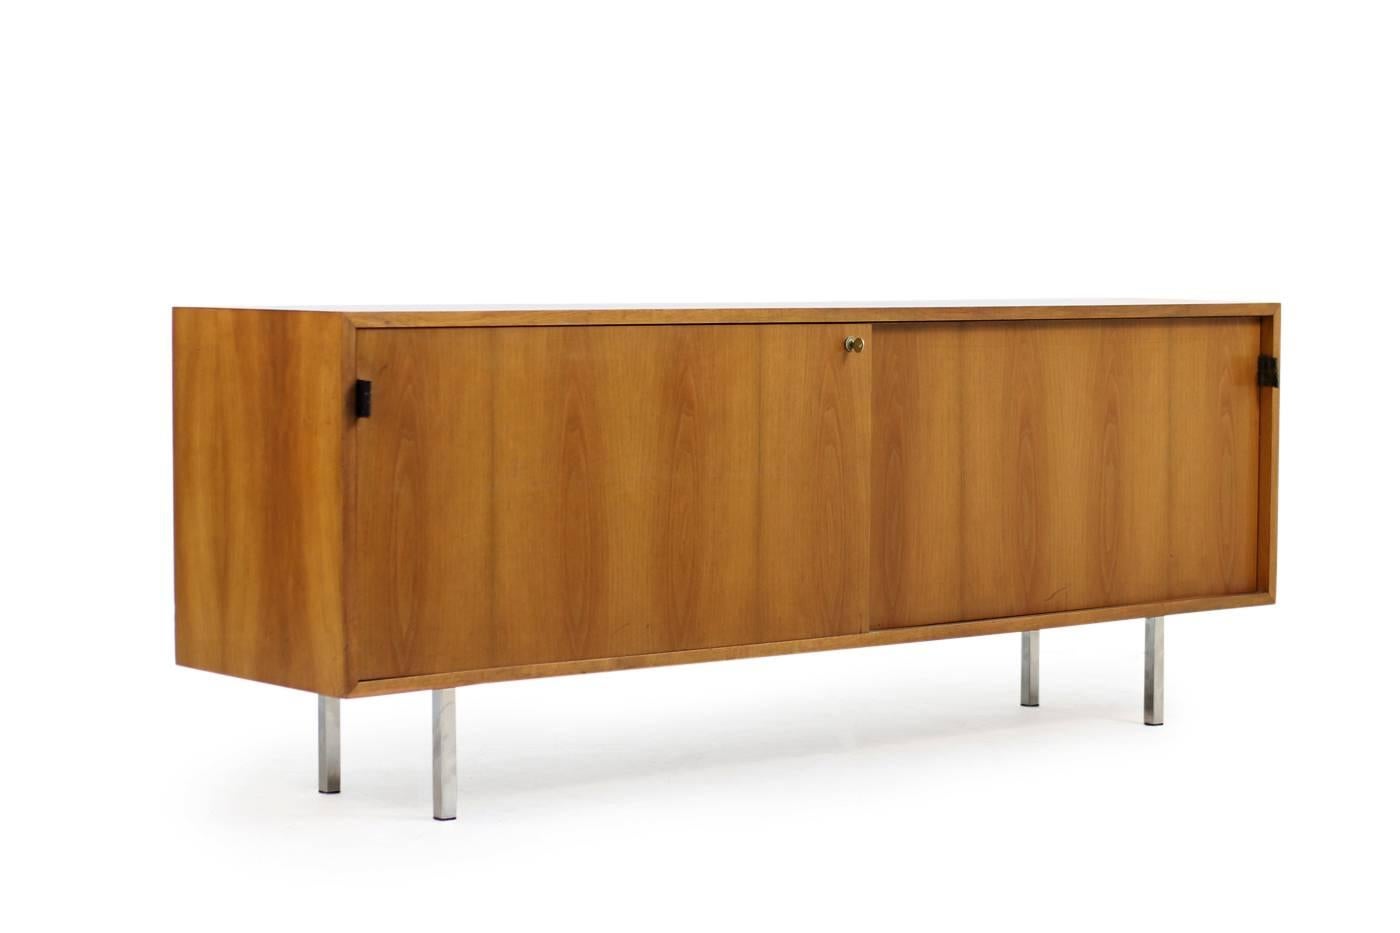 Leather Rare 1950s Florence Knoll Mod. 116 Cherrywood Sideboard Knoll International For Sale